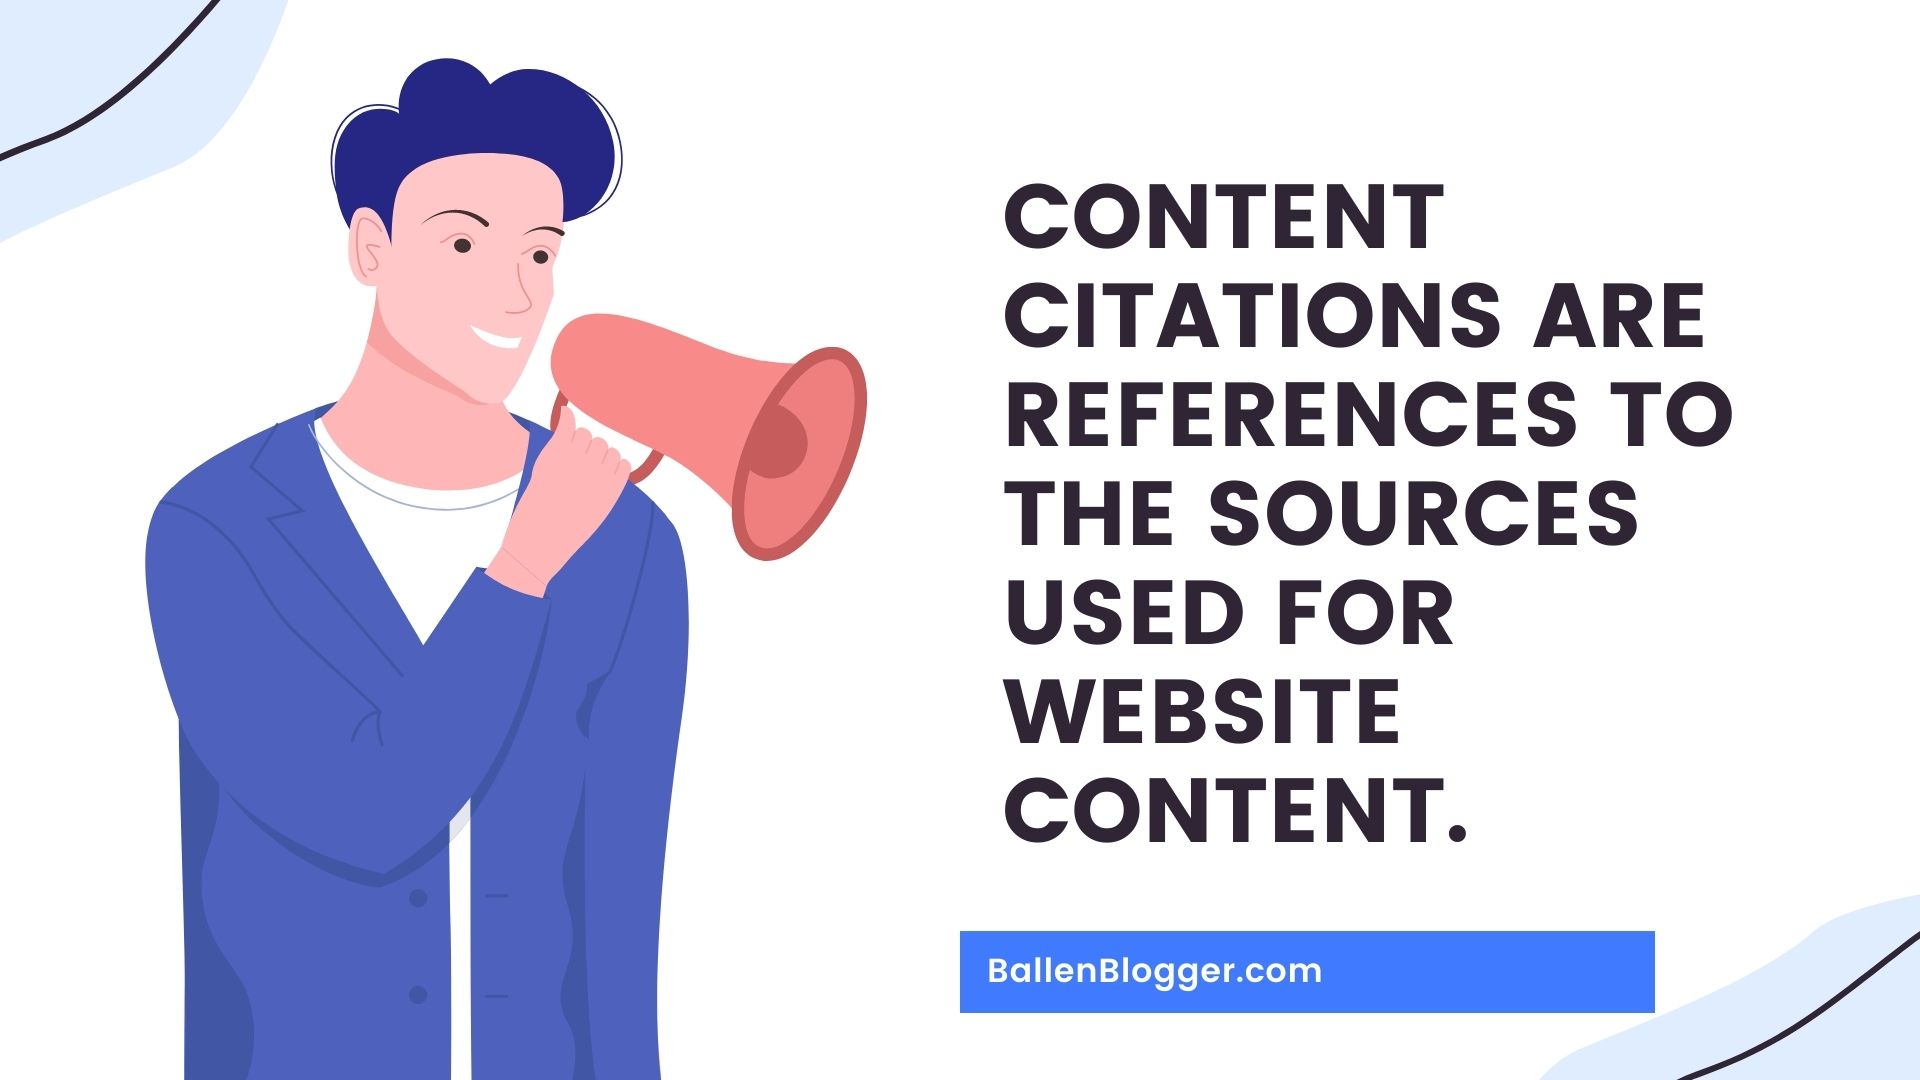 Content citations are references to the sources used for website content.